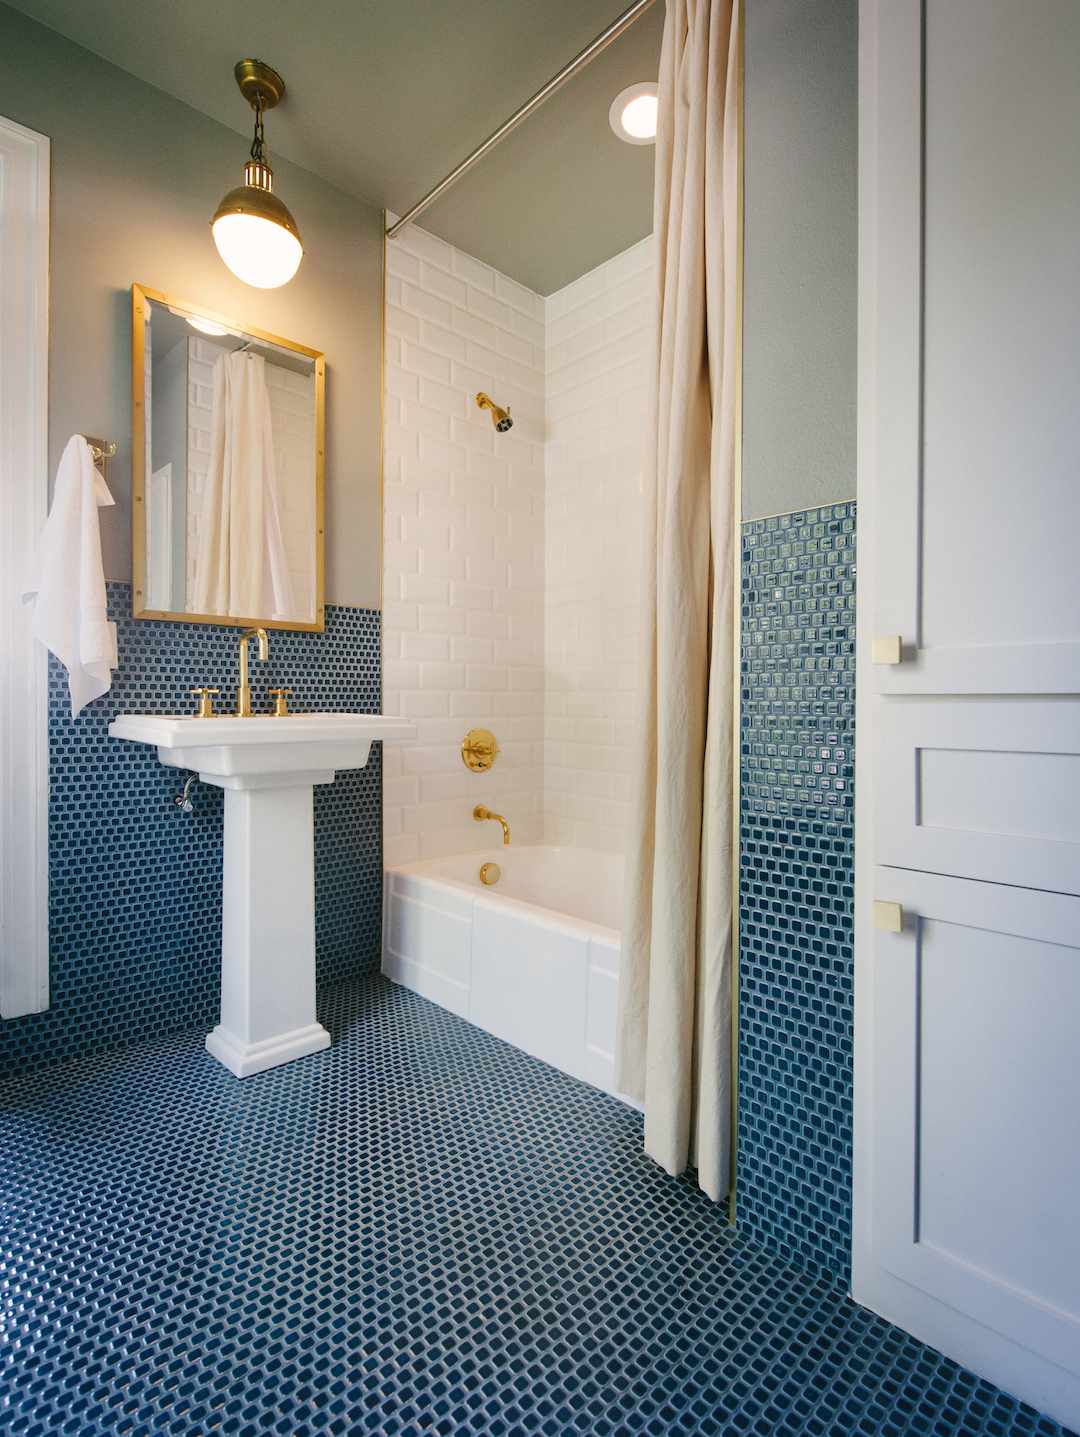 Gold fixtures in blue and white bathroom